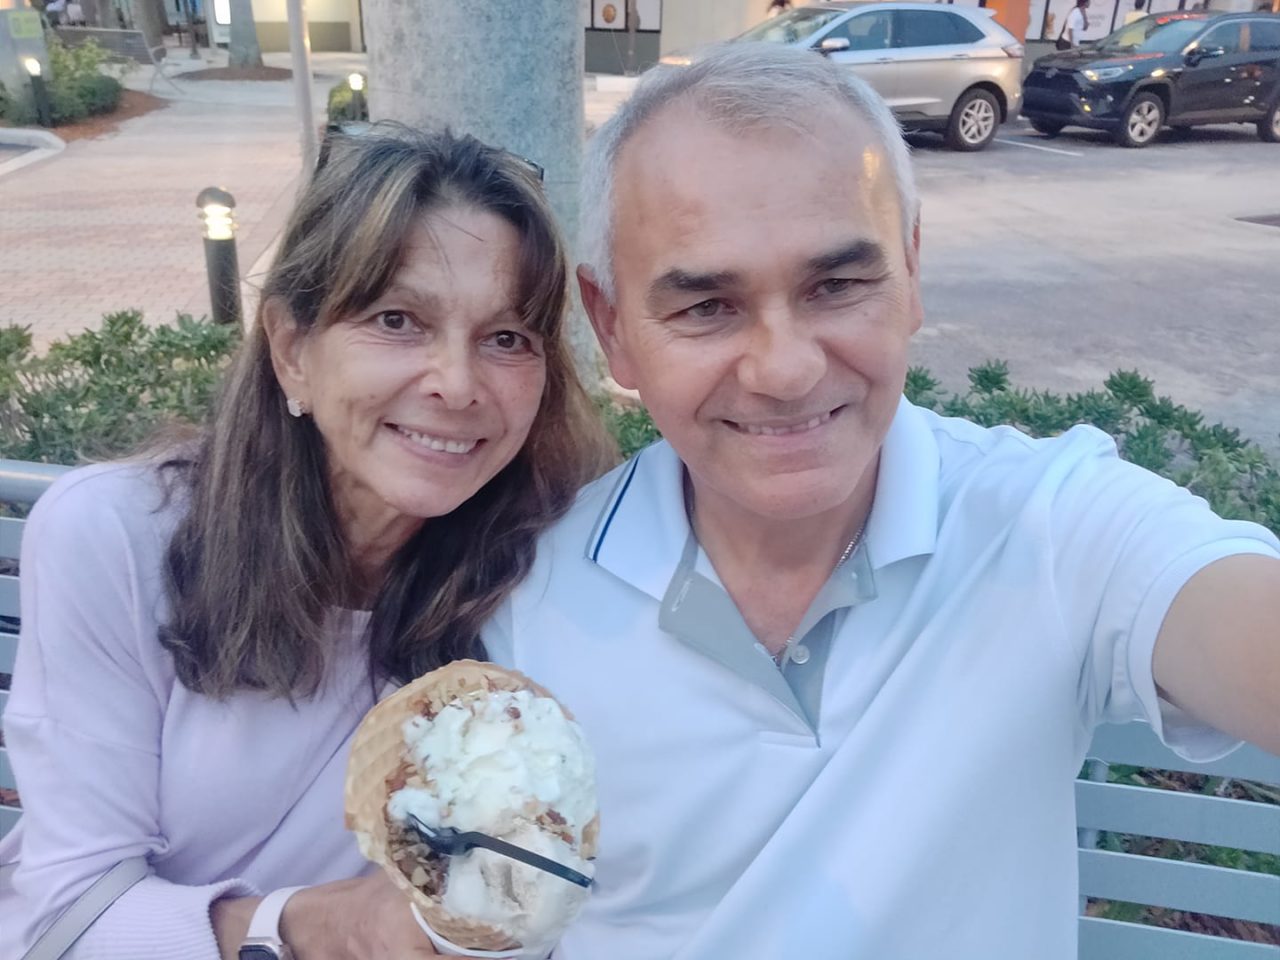 Two people take a selfie over ice cream. One is a woman with dark hair. The other a gentleman with short gray hair.